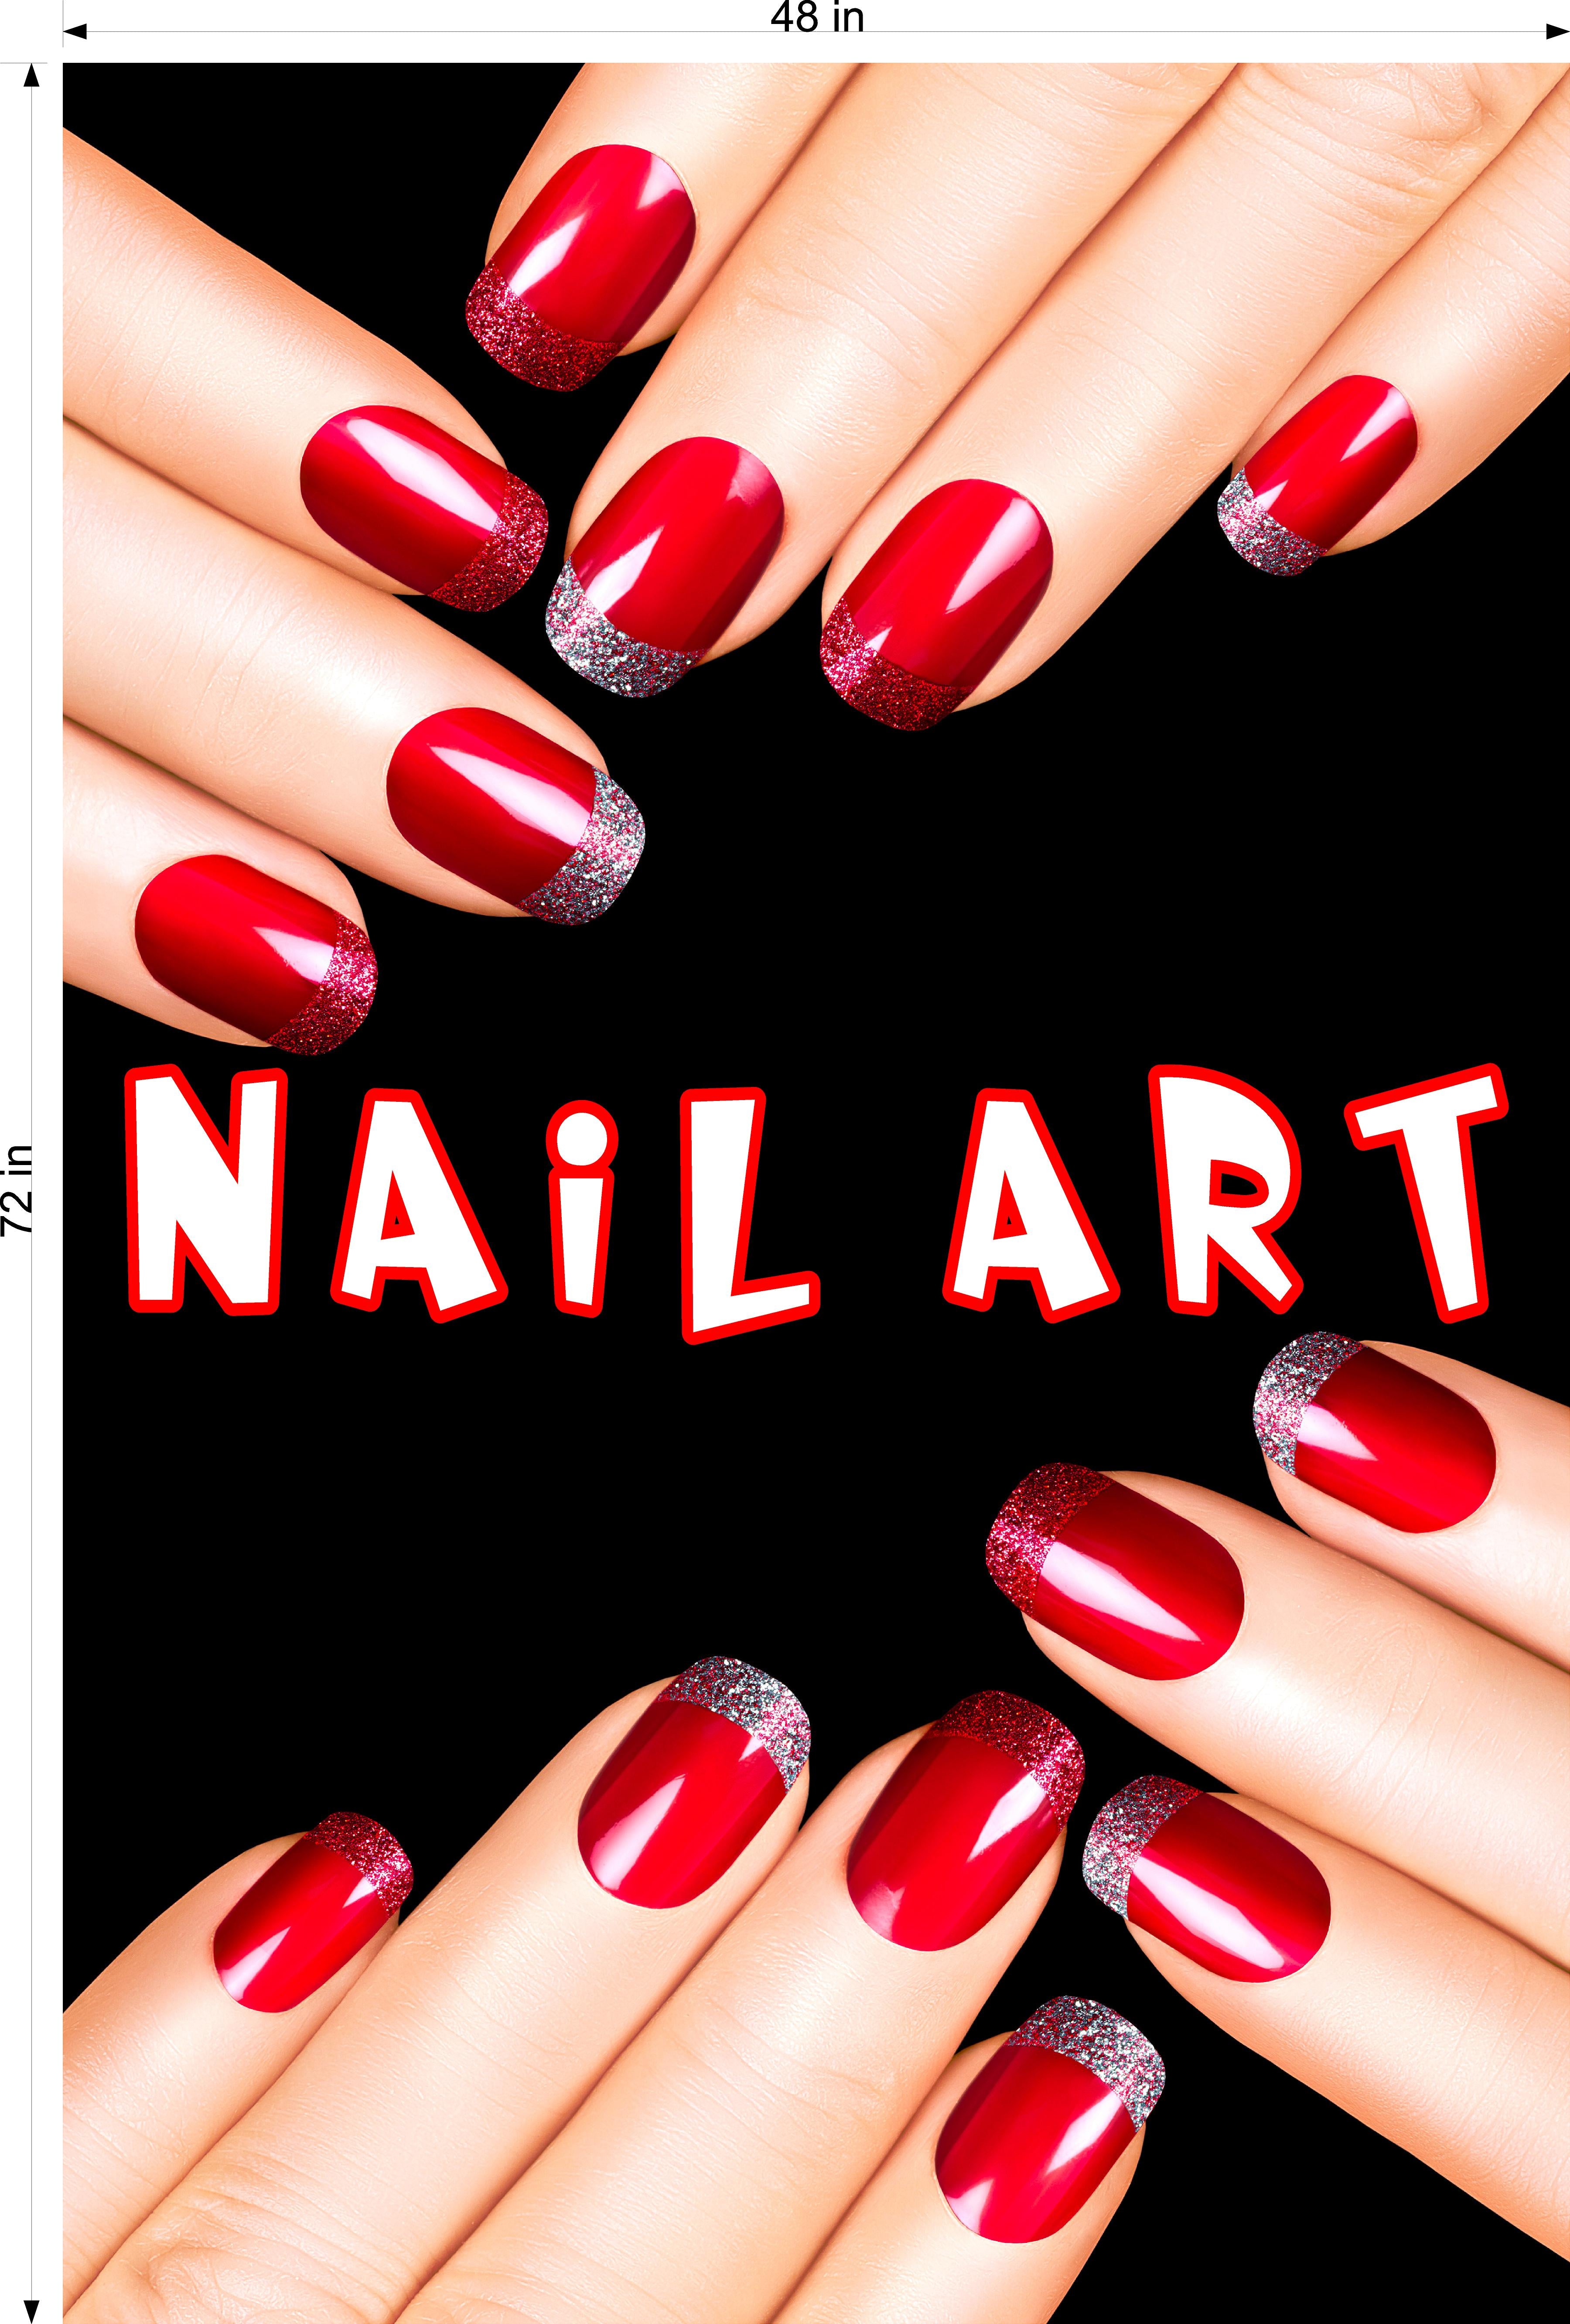 Nail Design 08 Photo-realistic Paper Poster Premium Interior Inside Sign  Marketing Wall Window Non-laminated Vertical - Etsy India